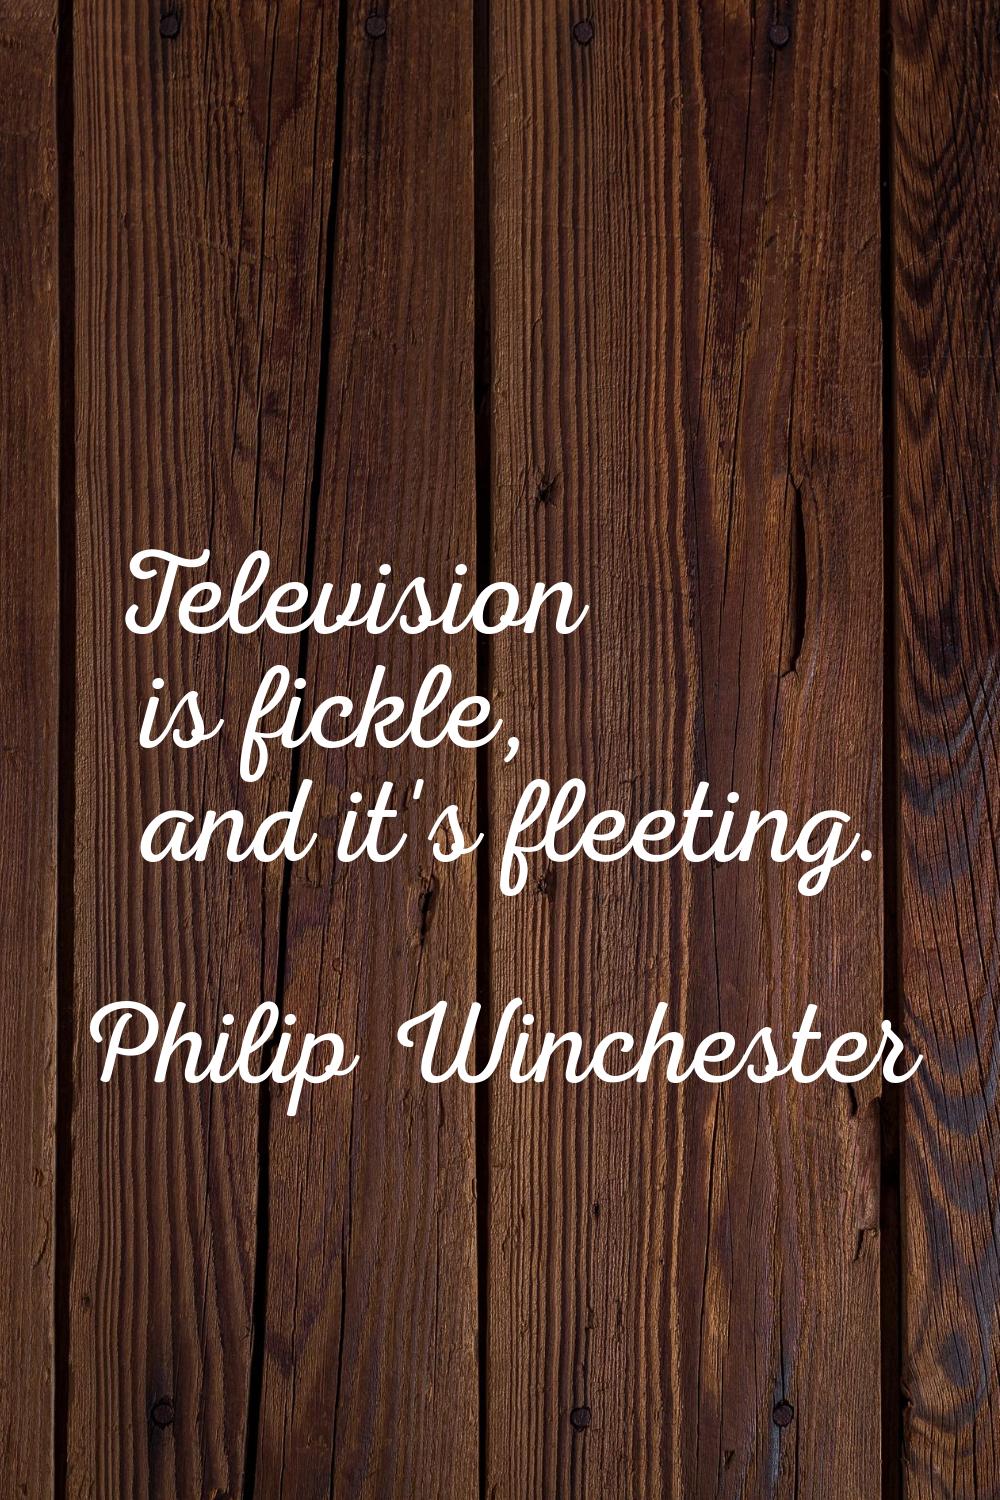 Television is fickle, and it's fleeting.